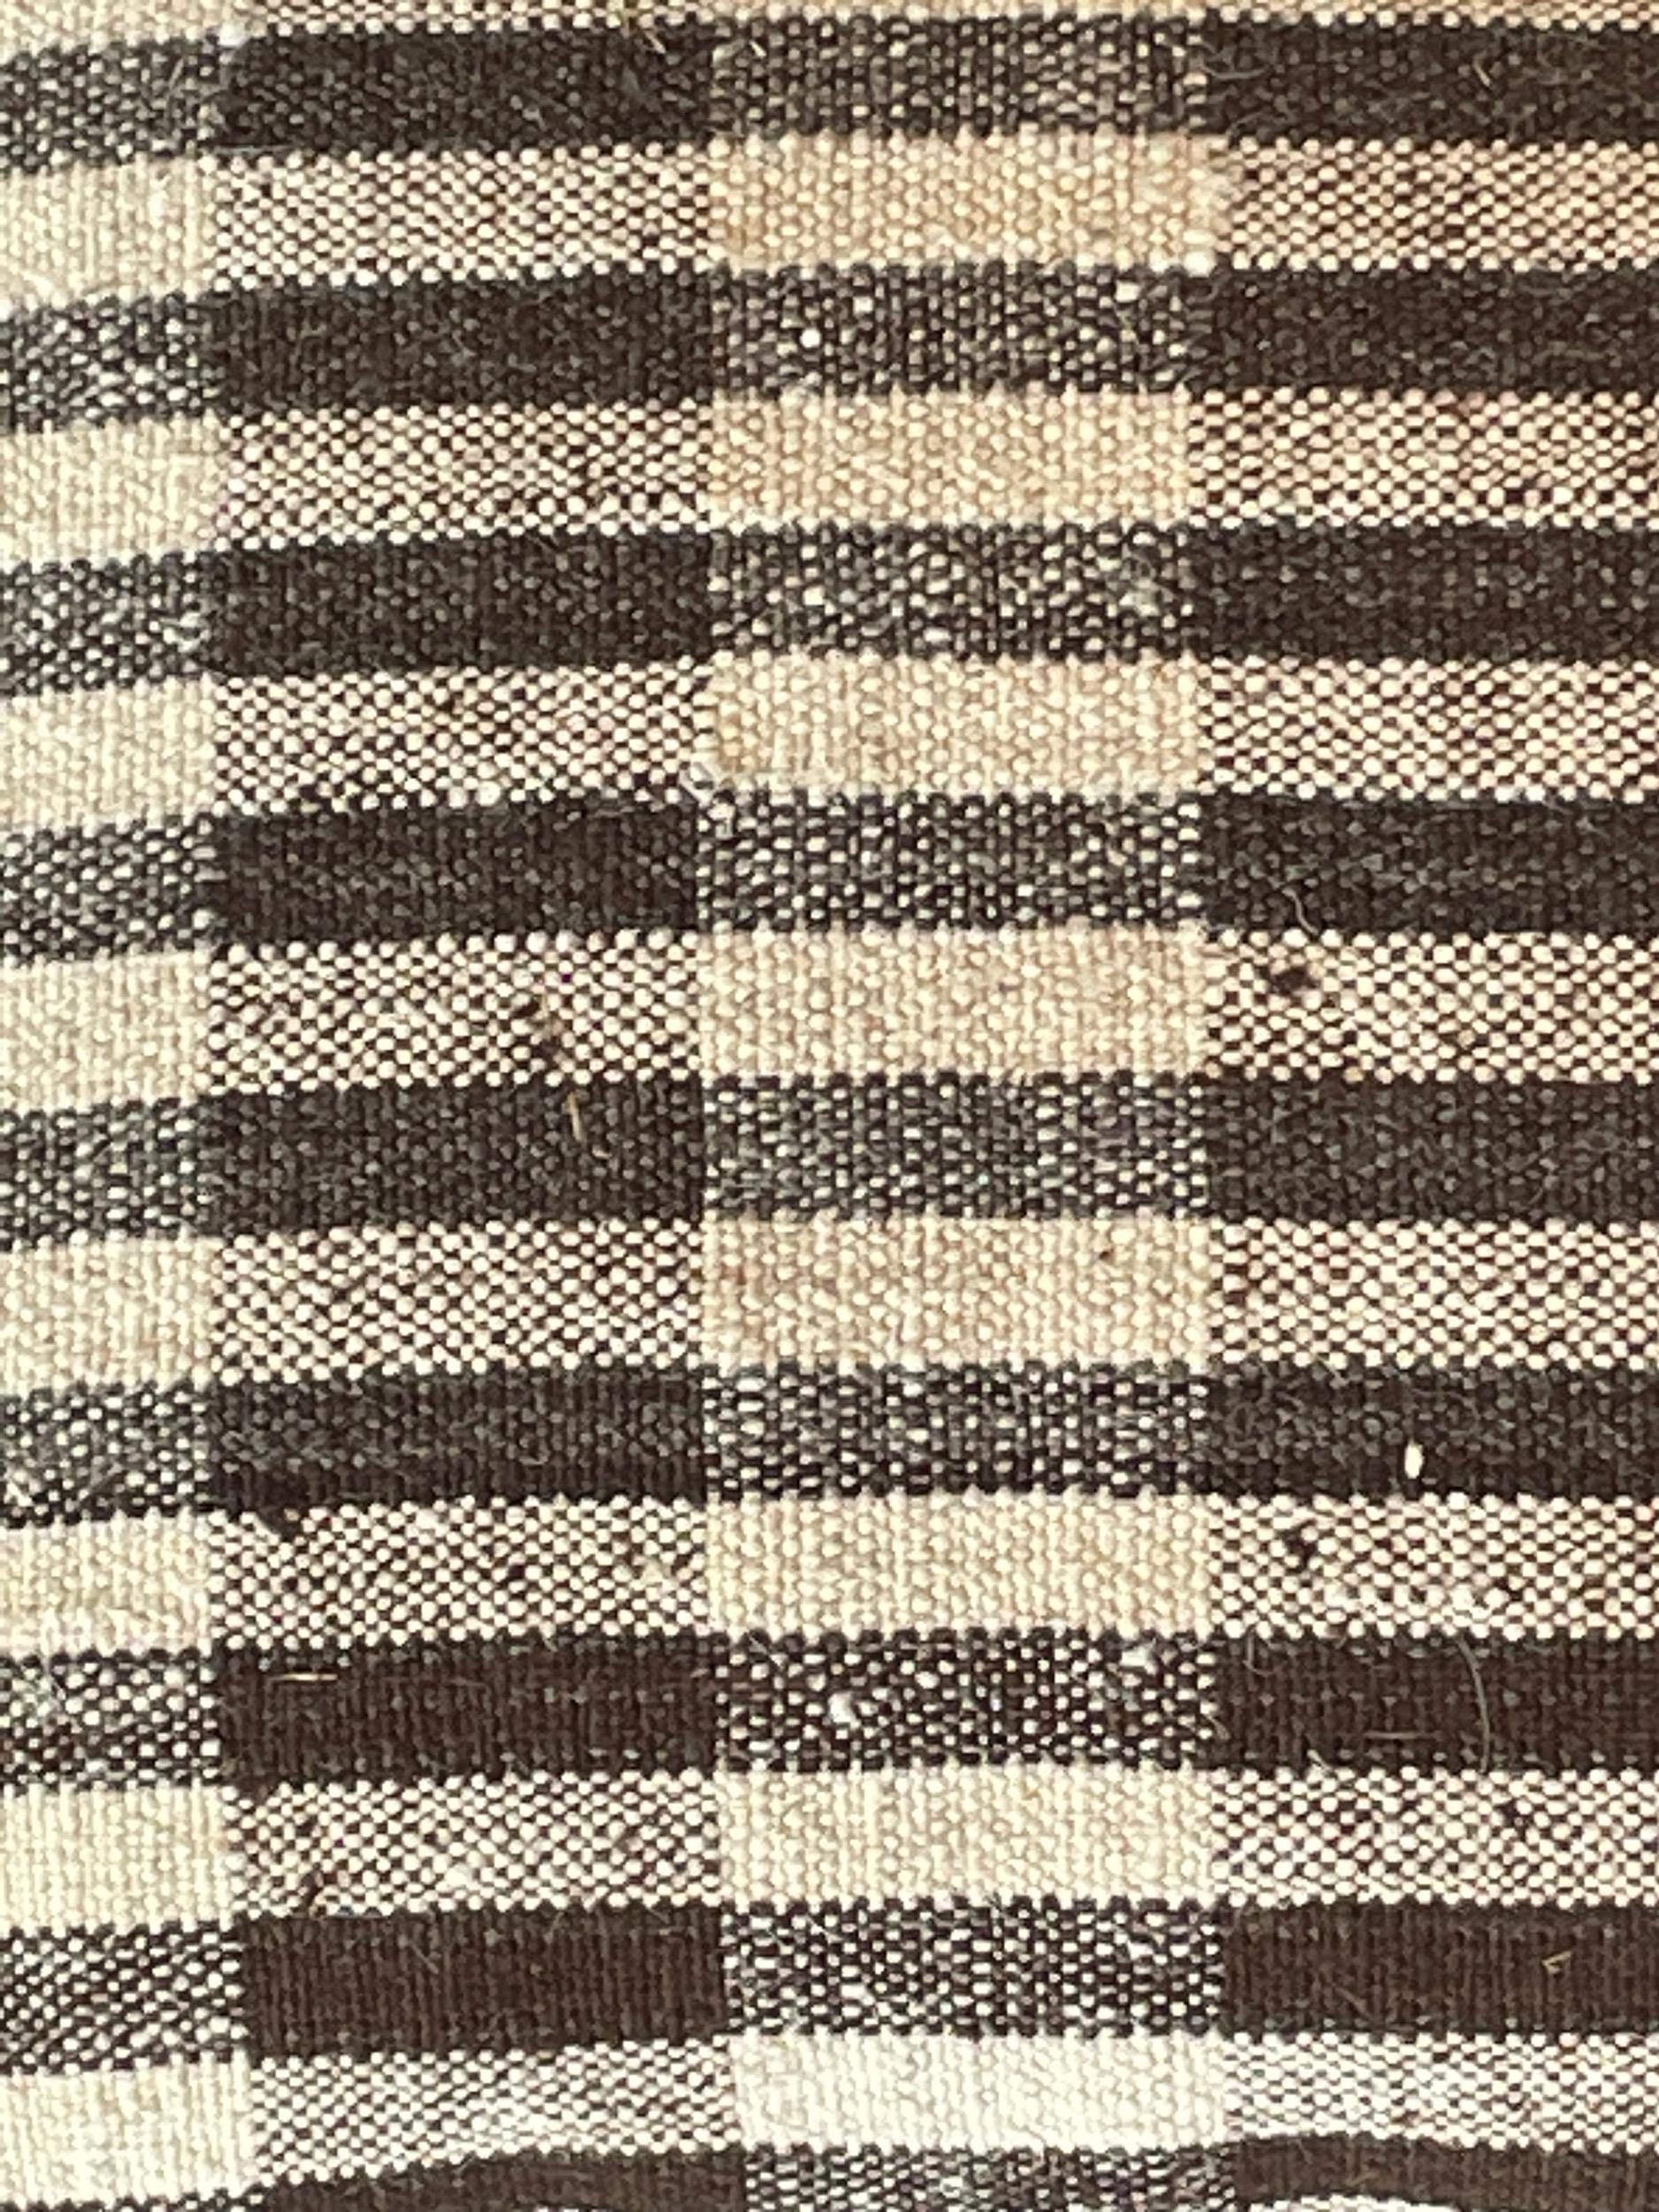 Midcentury Portuguese pillow made from handwoven fabric used originally as flour sacks.
New down and feather insert.
Brown and cream stripes.